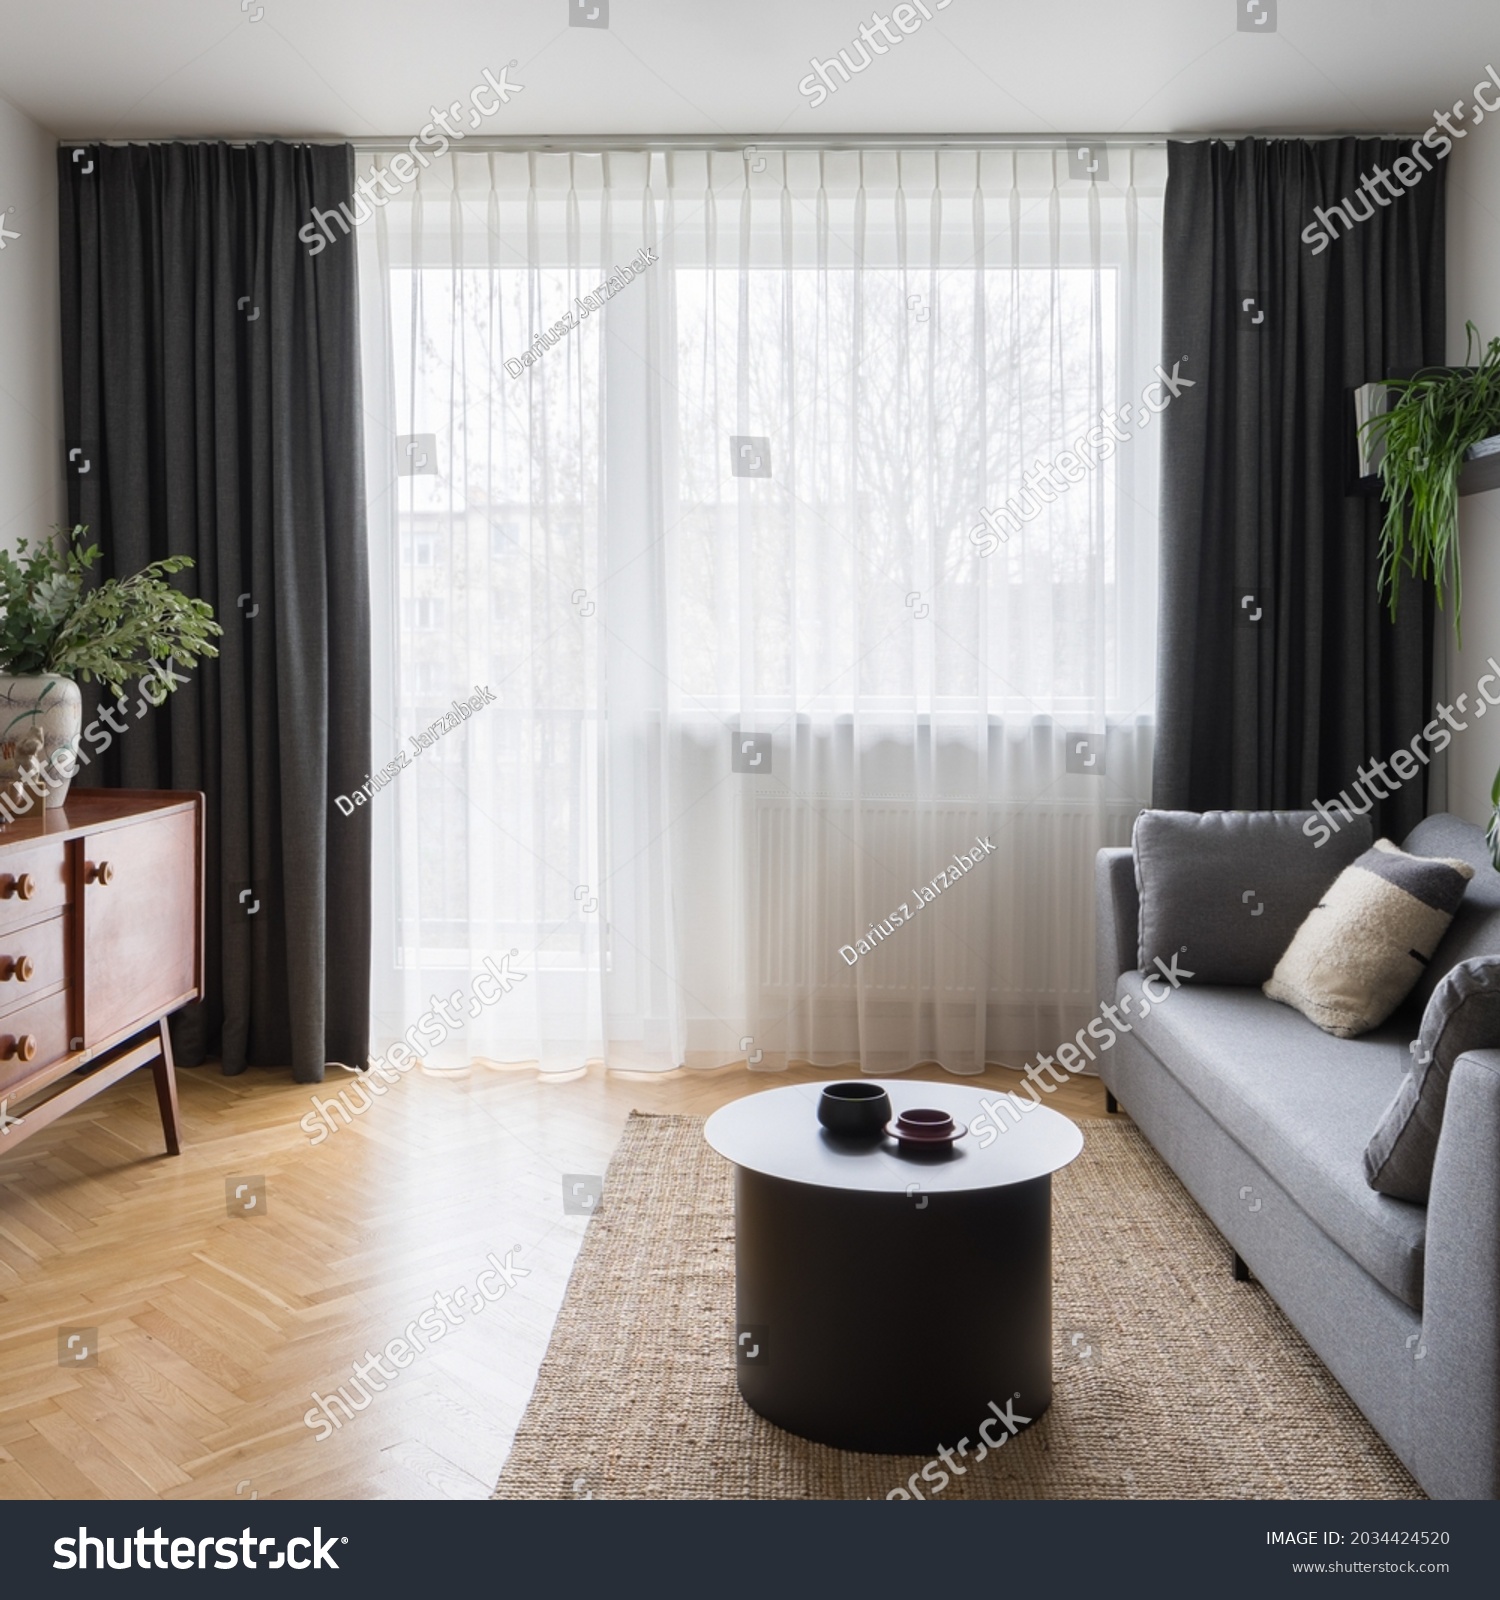 Big window behind decorative curtains in eclectic living room with gray couch, modern coffee table and vintage cupboard #2034424520